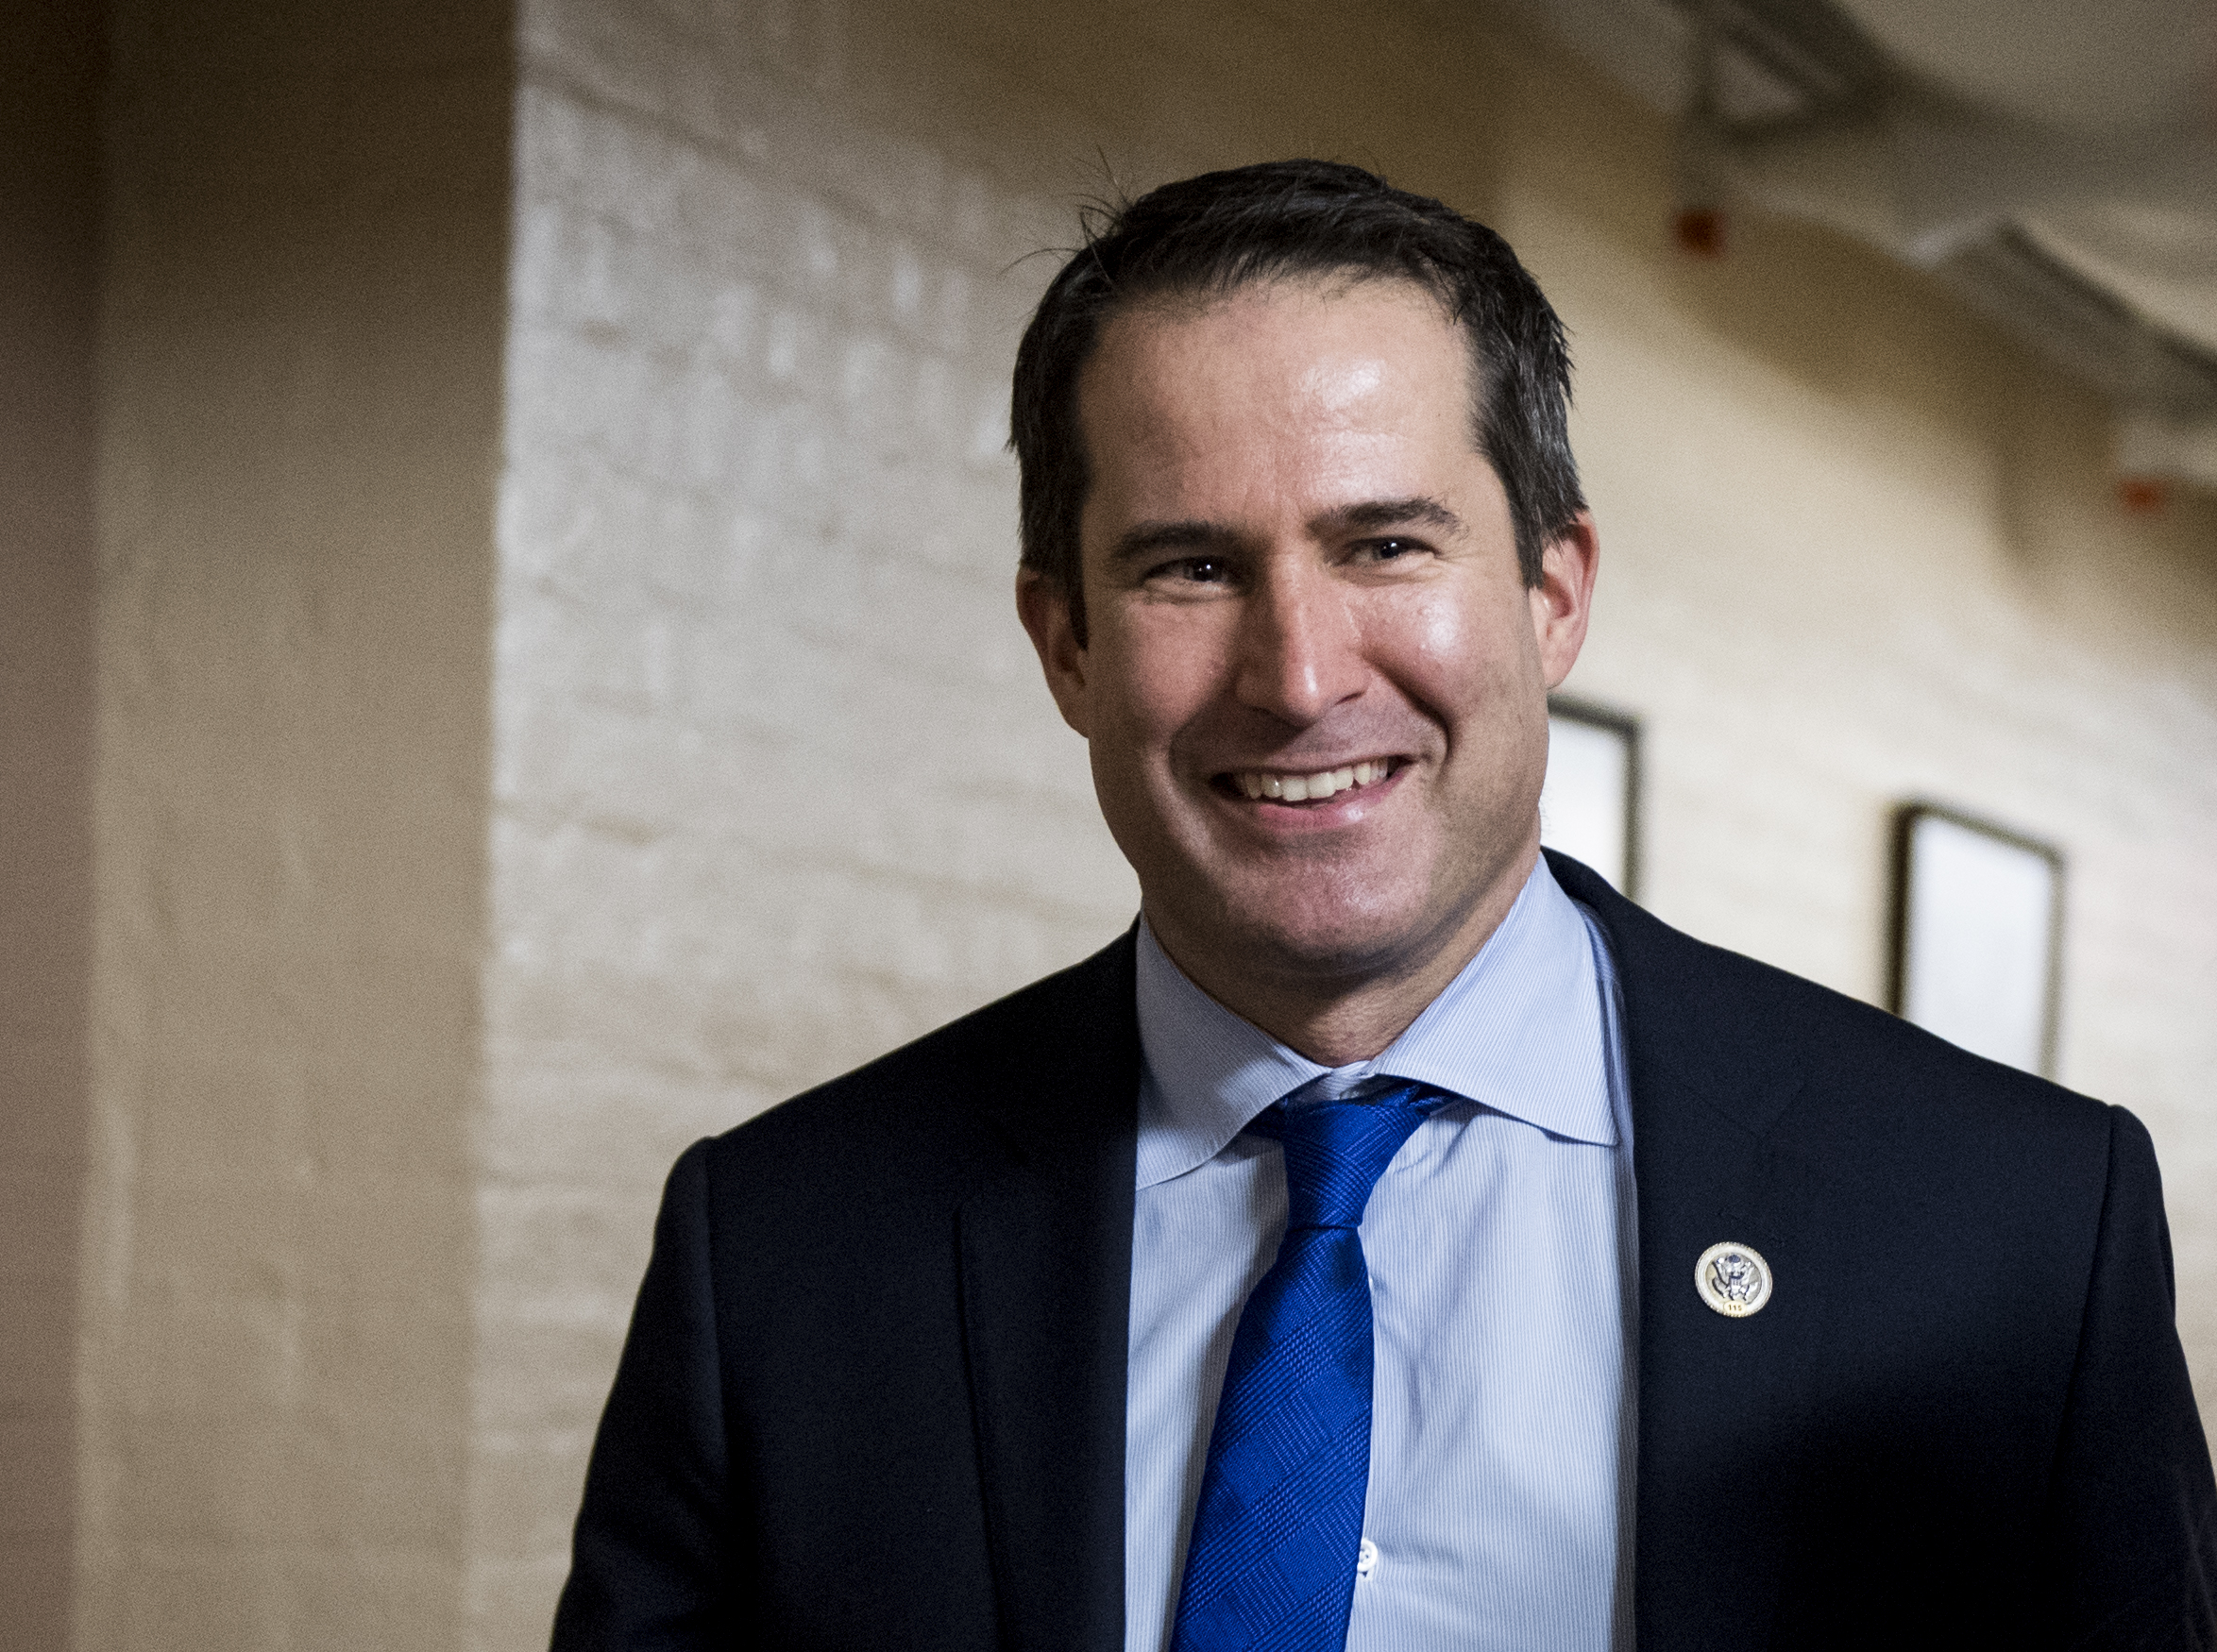 Rep. Seth Moulton, D-Mass., arrives for the House Democrats' caucus meeting in the Capitol on Thursday, Nov. 15, 2018. (Bill Clark—CQ-Roll Call,Inc.)